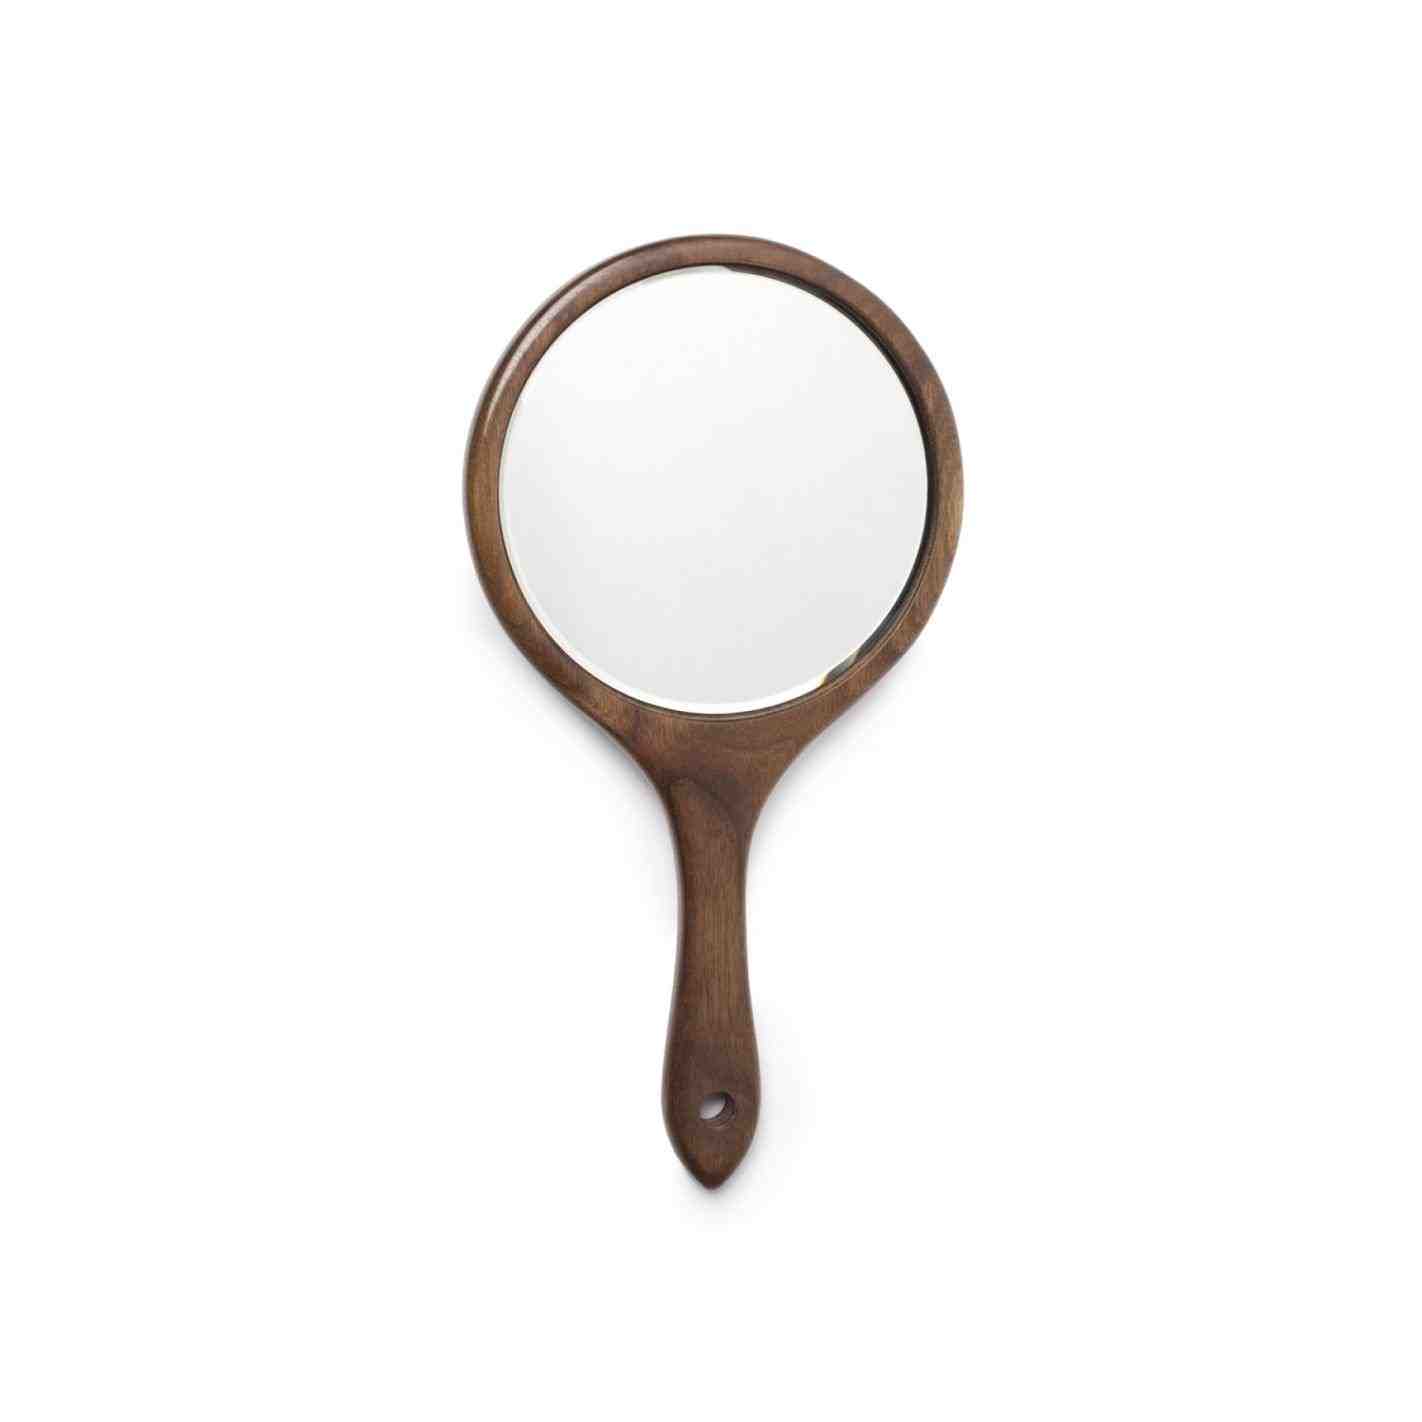 Pictures of hand mirrors. Barber clipart mirror